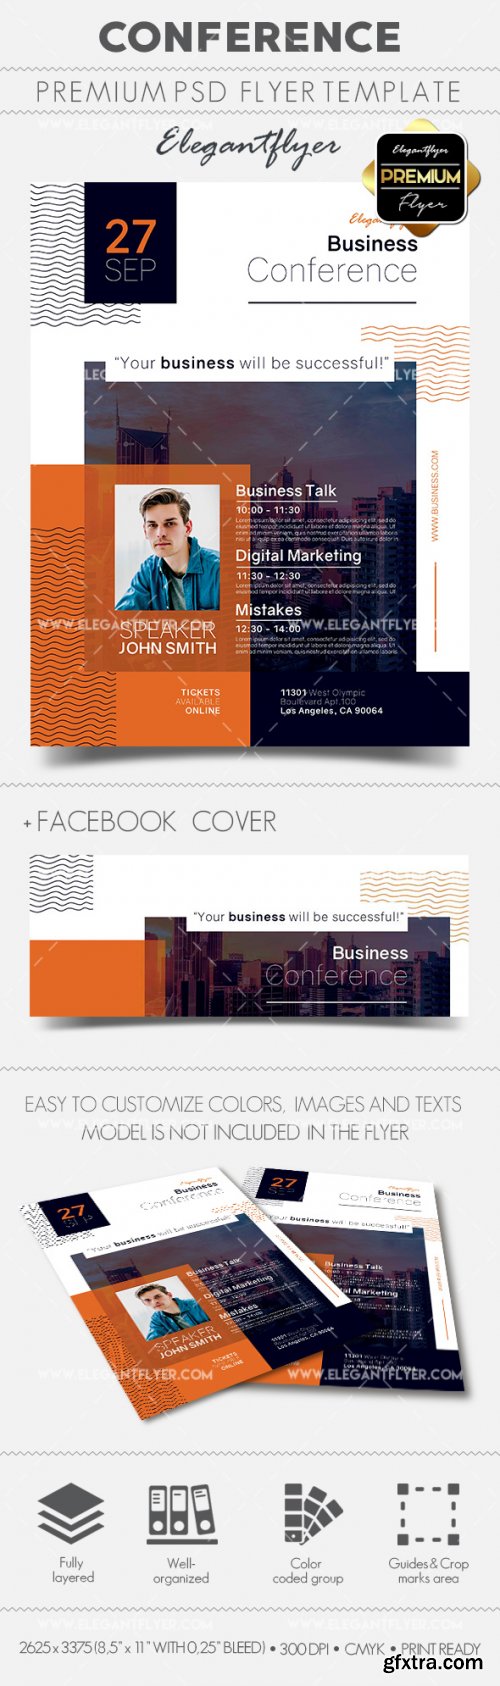 Conference V4 2018 Flyer PSD Template + Facebook Cover